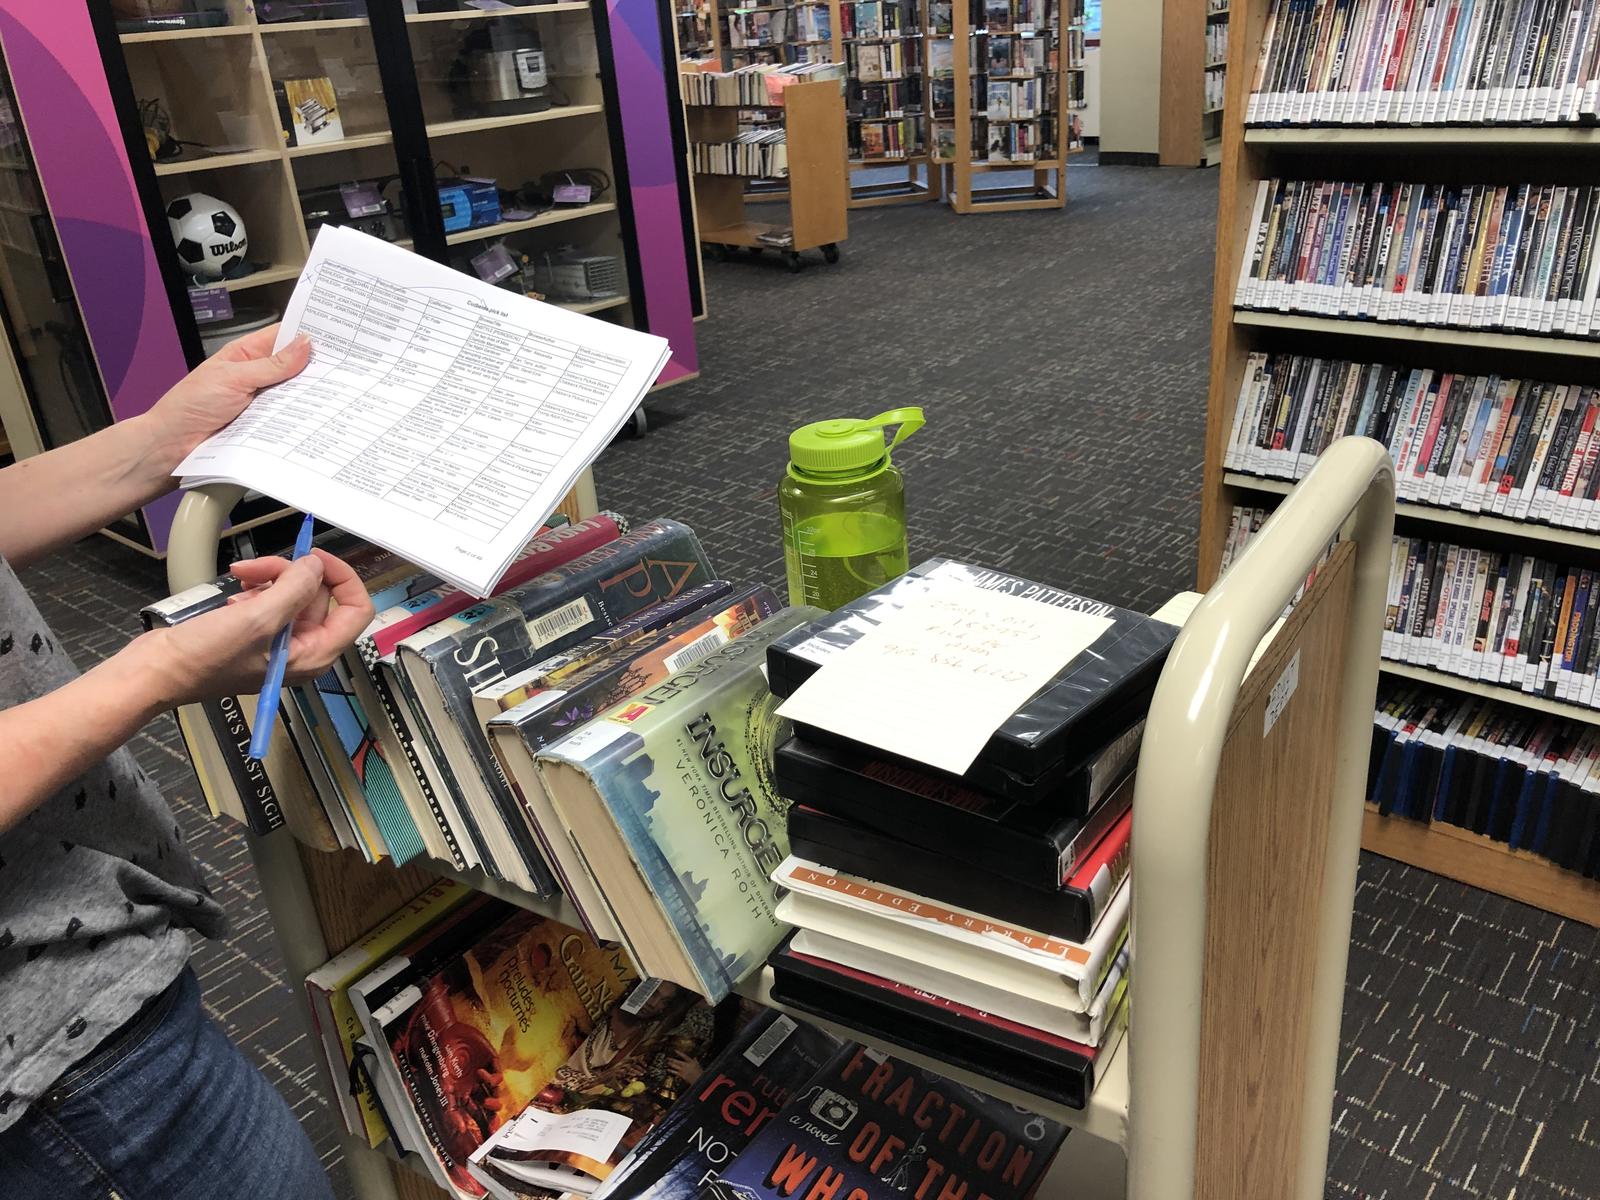 Library staff gathering material for curbside pick up